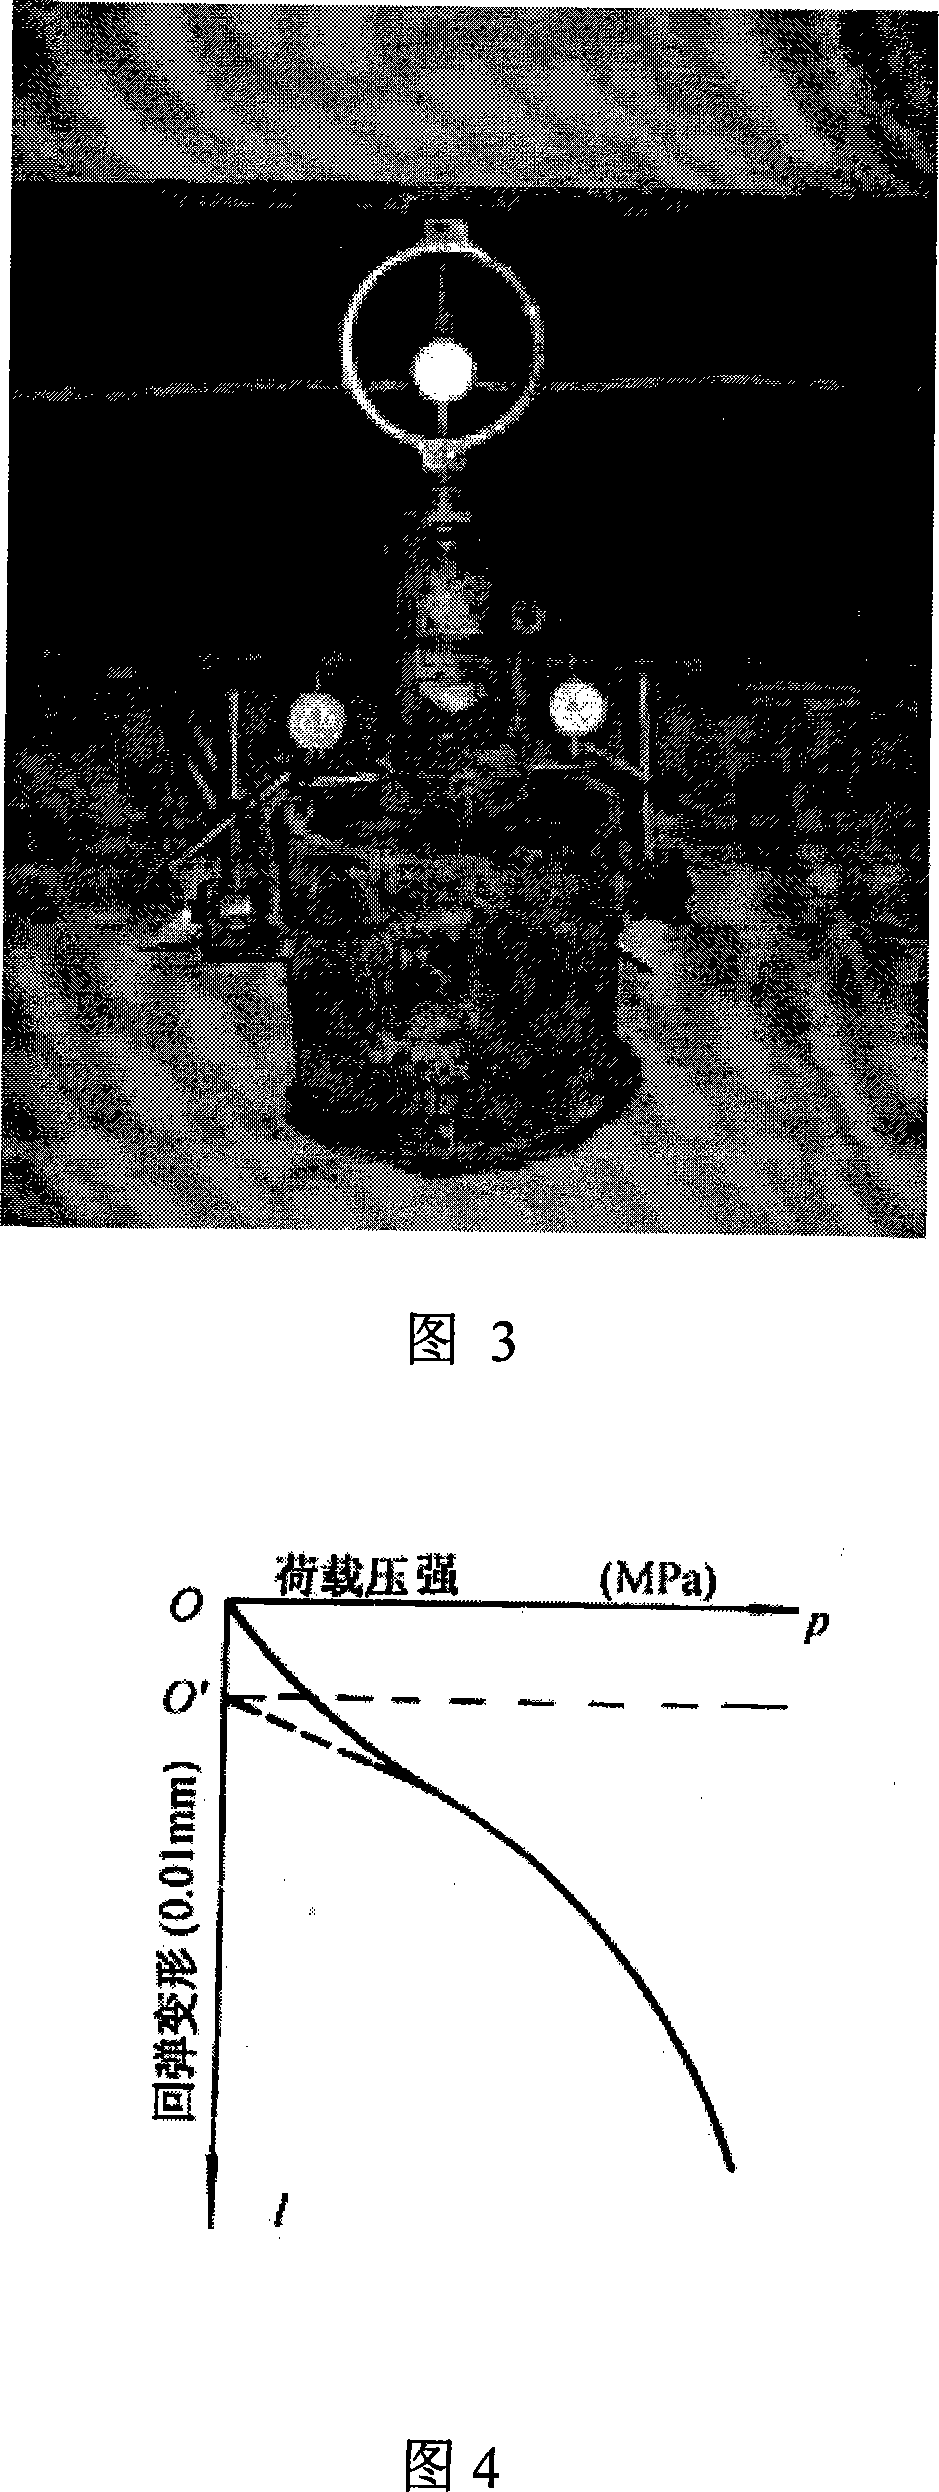 Road basal pelletized material mixture resilient modulus indoor test method and device